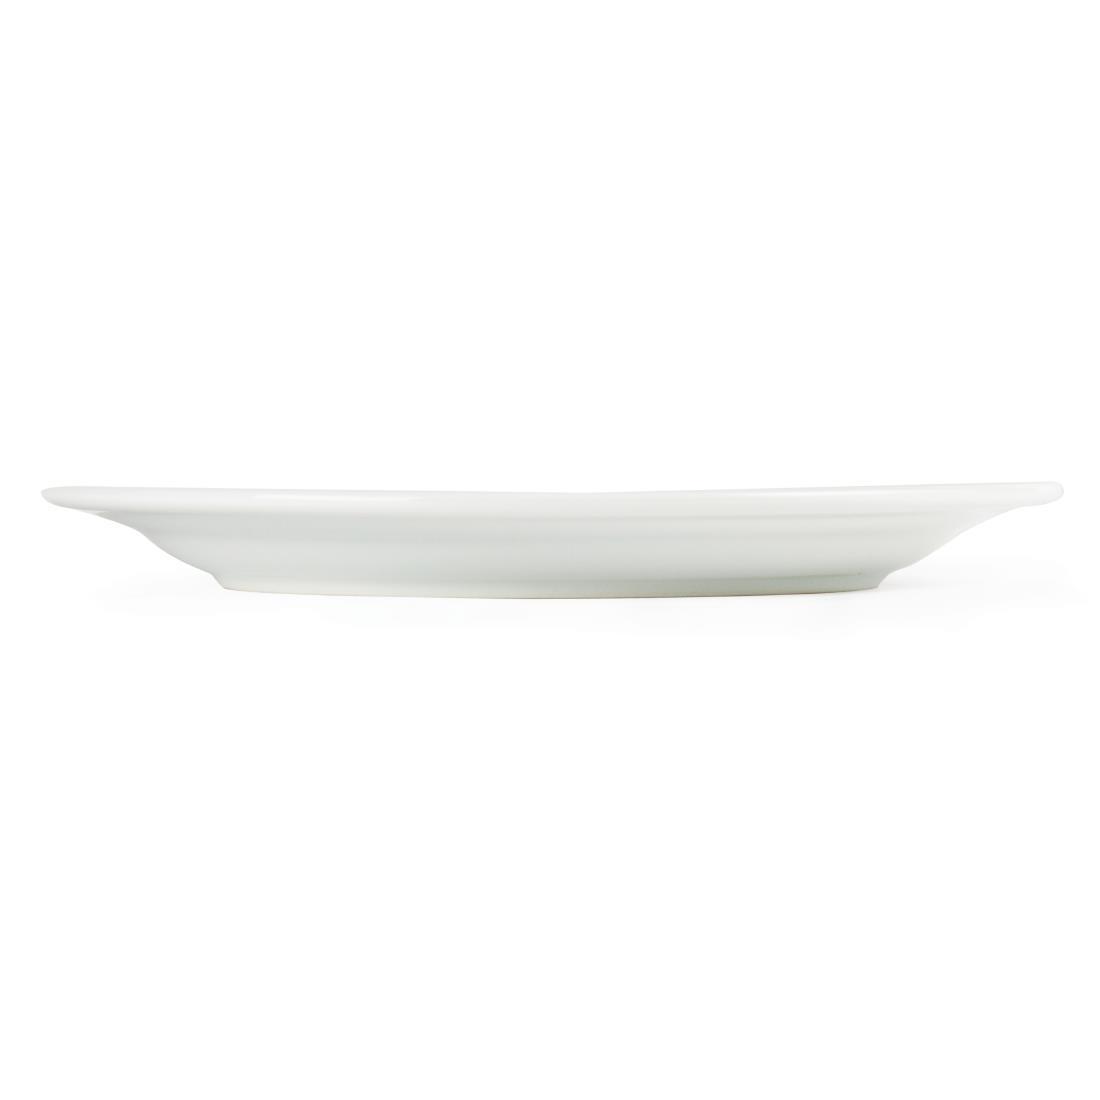 Olympia Whiteware Wide Rimmed Plates 250mm (Pack of 12) - CB481  - 7